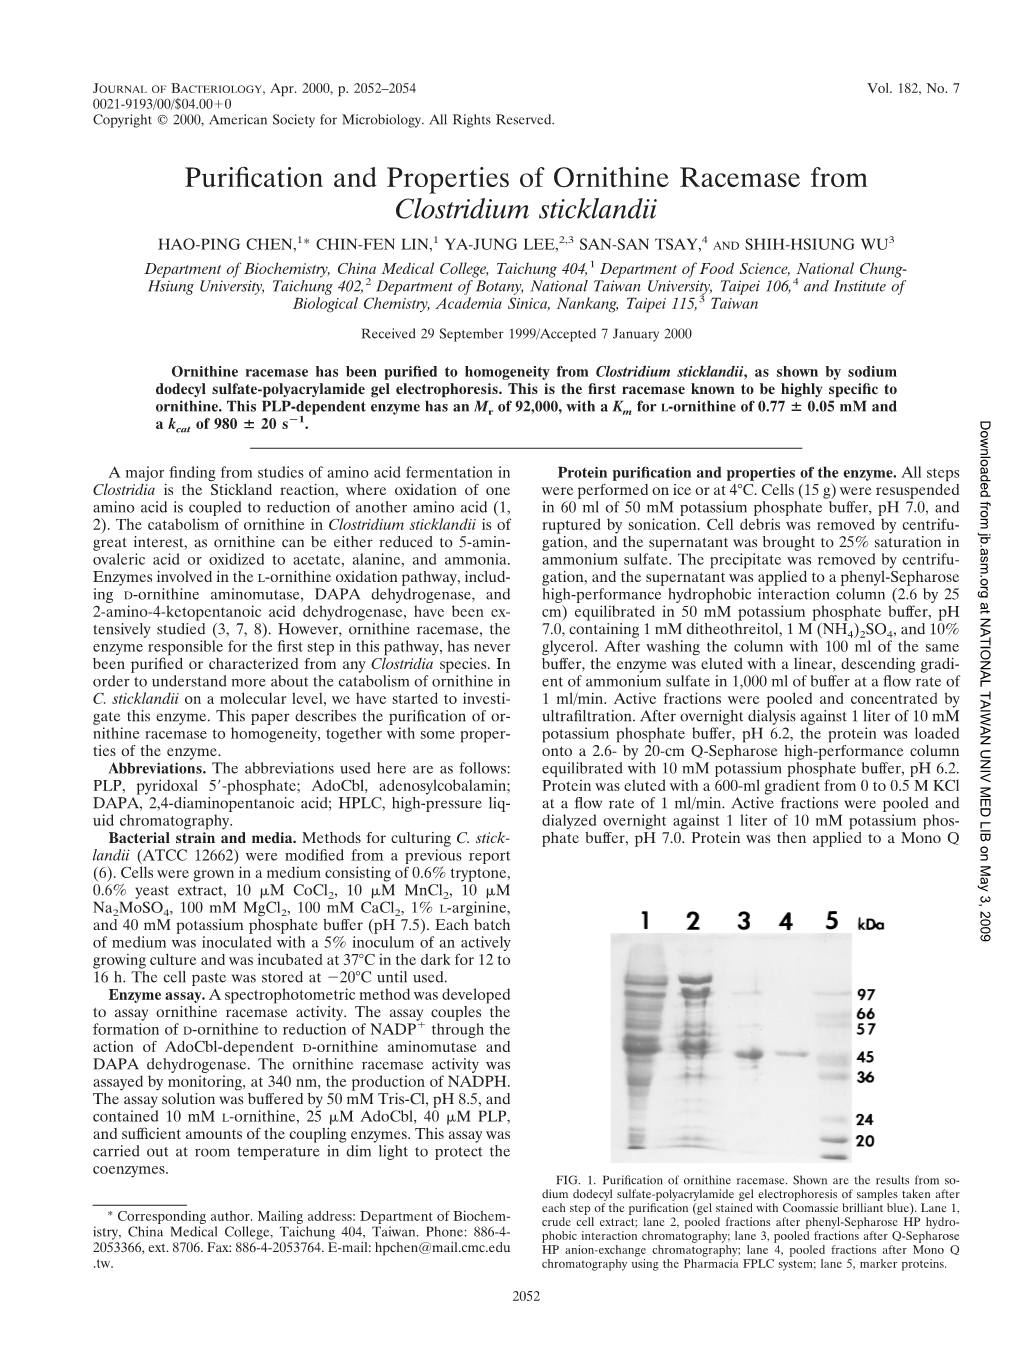 Purification and Properties of Ornithine Racemase From